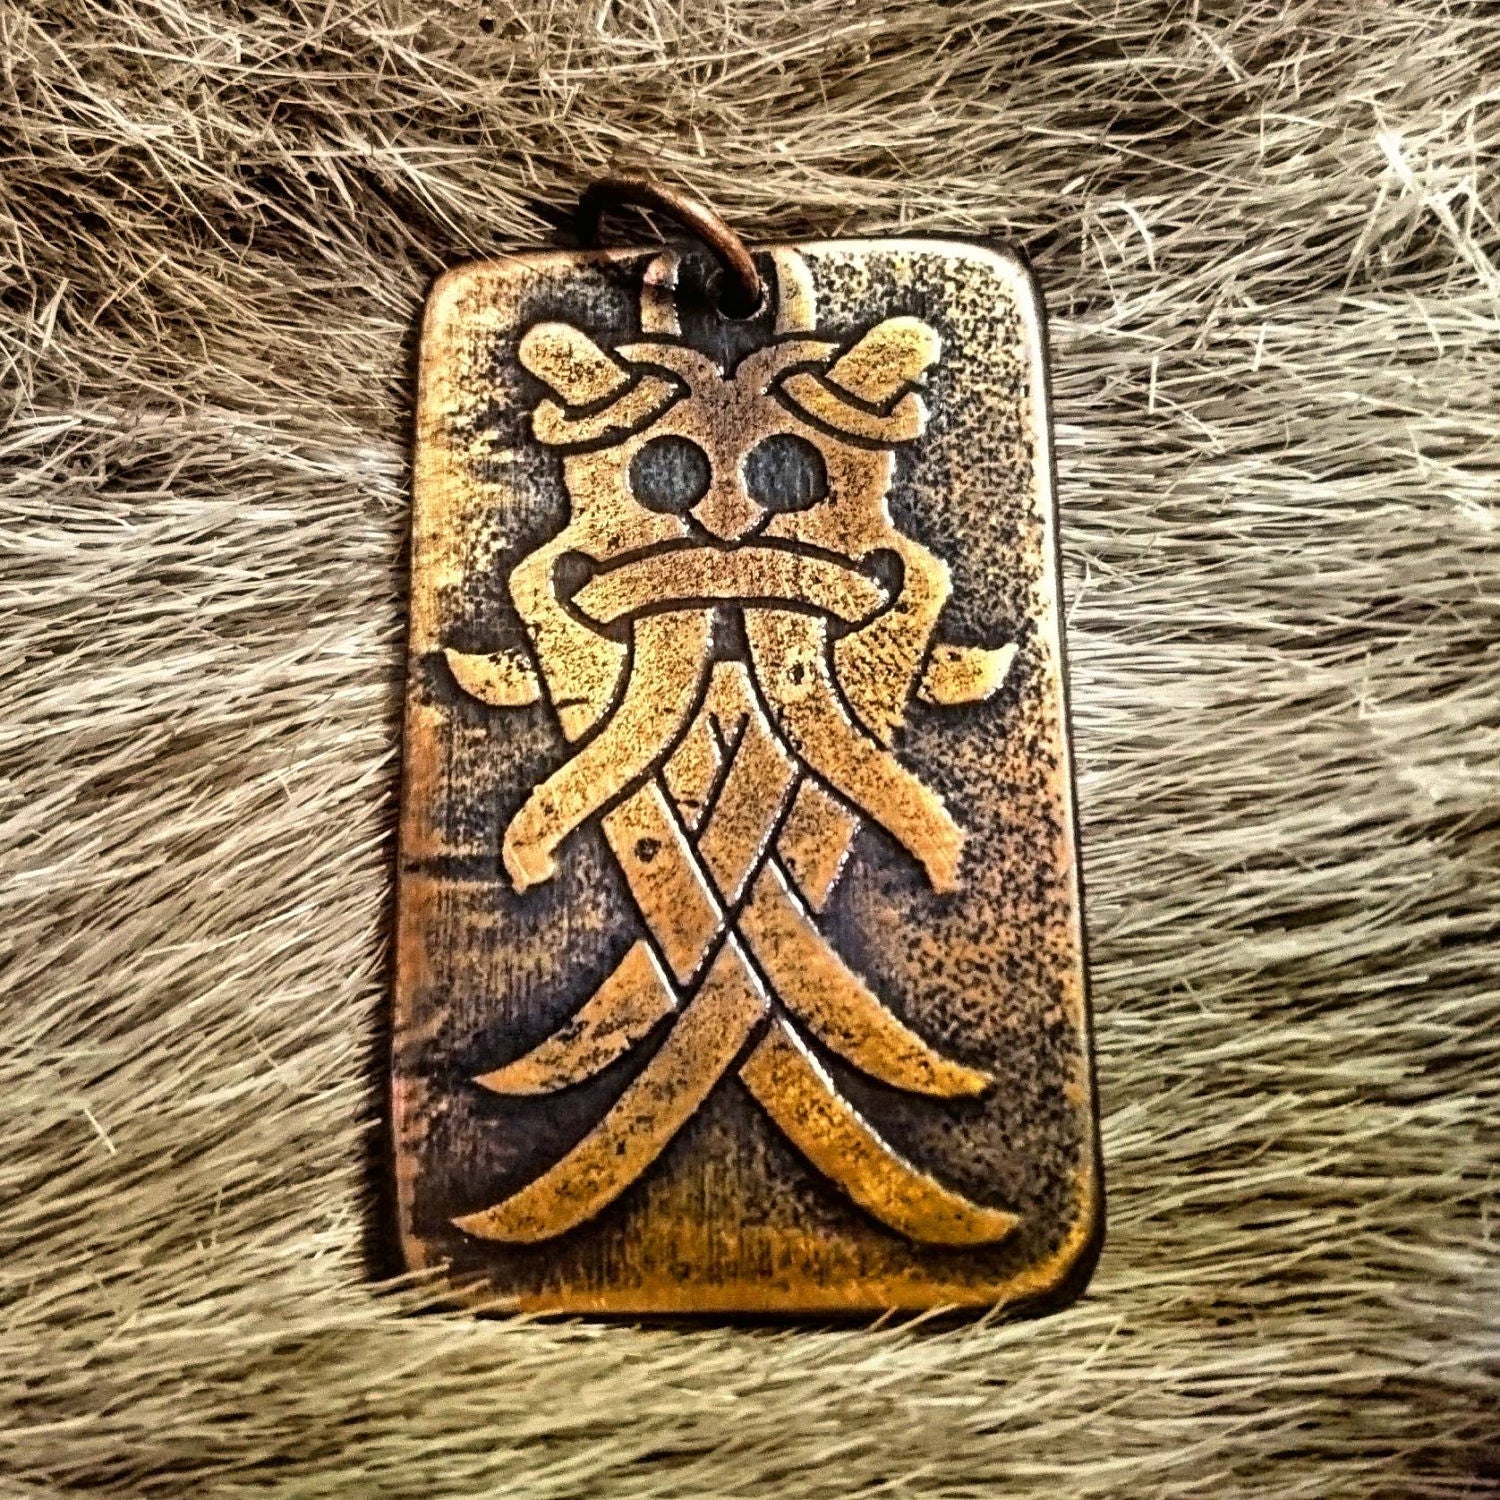 Philadelphia Souvenir Rend The Aarthus Mask (Odin's Mask) Pendant in Copper-Homage to the death o